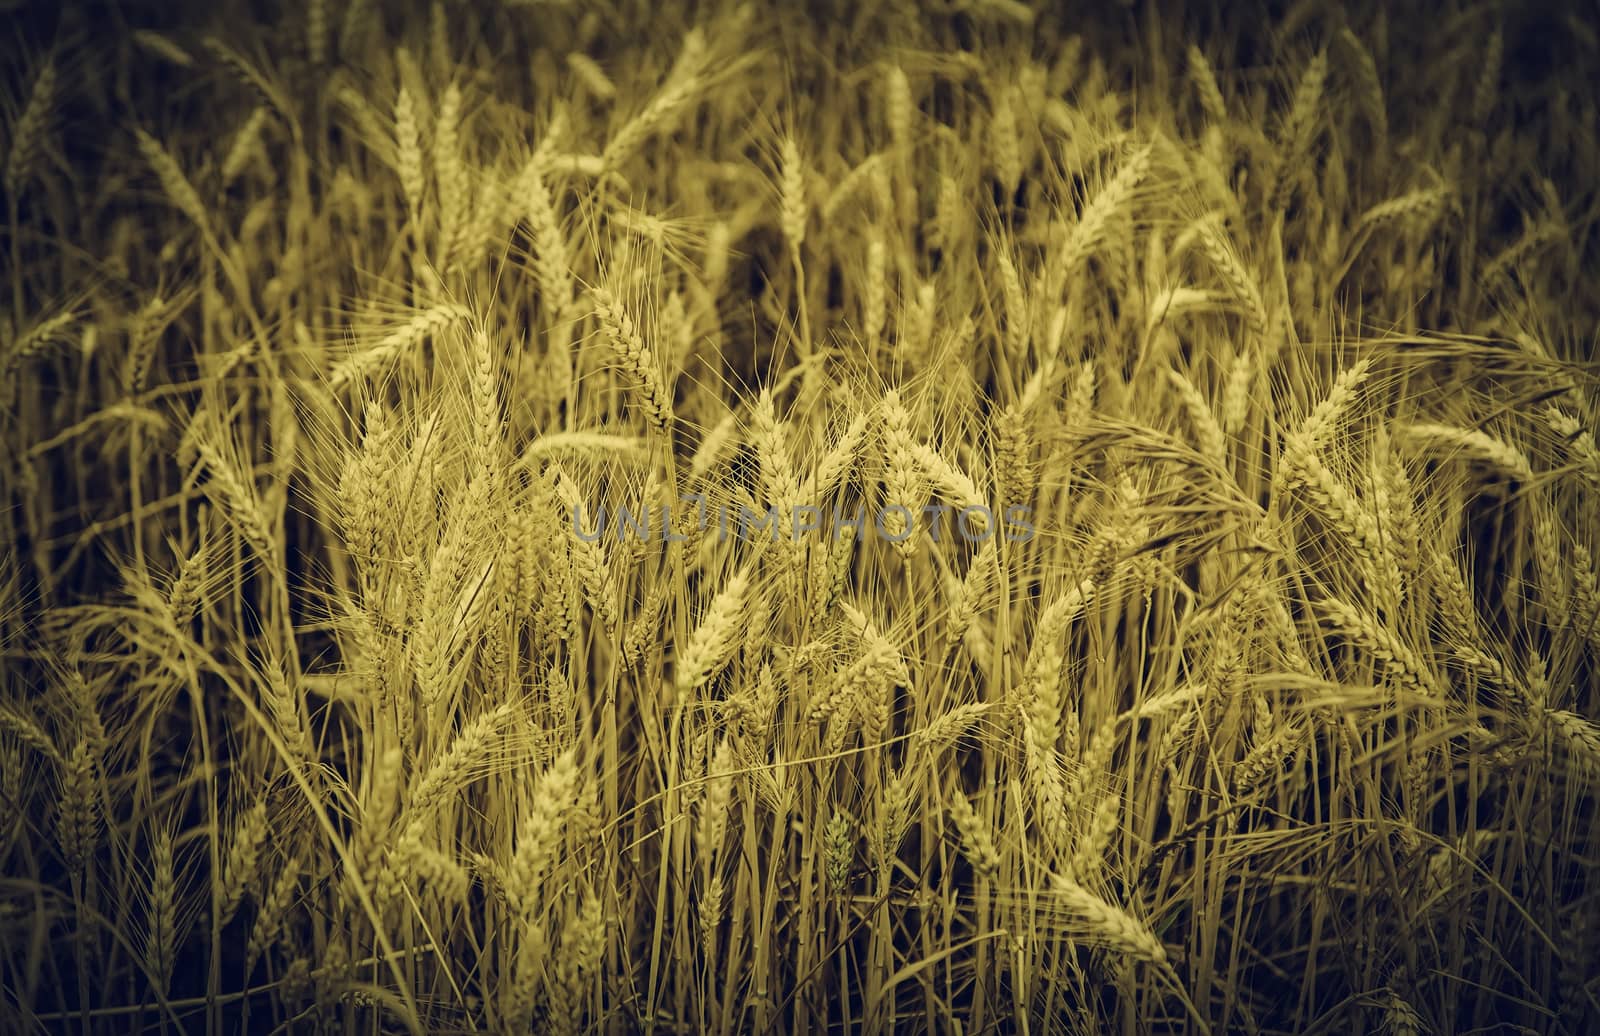 Wheat field, detail of a plantation of cereals